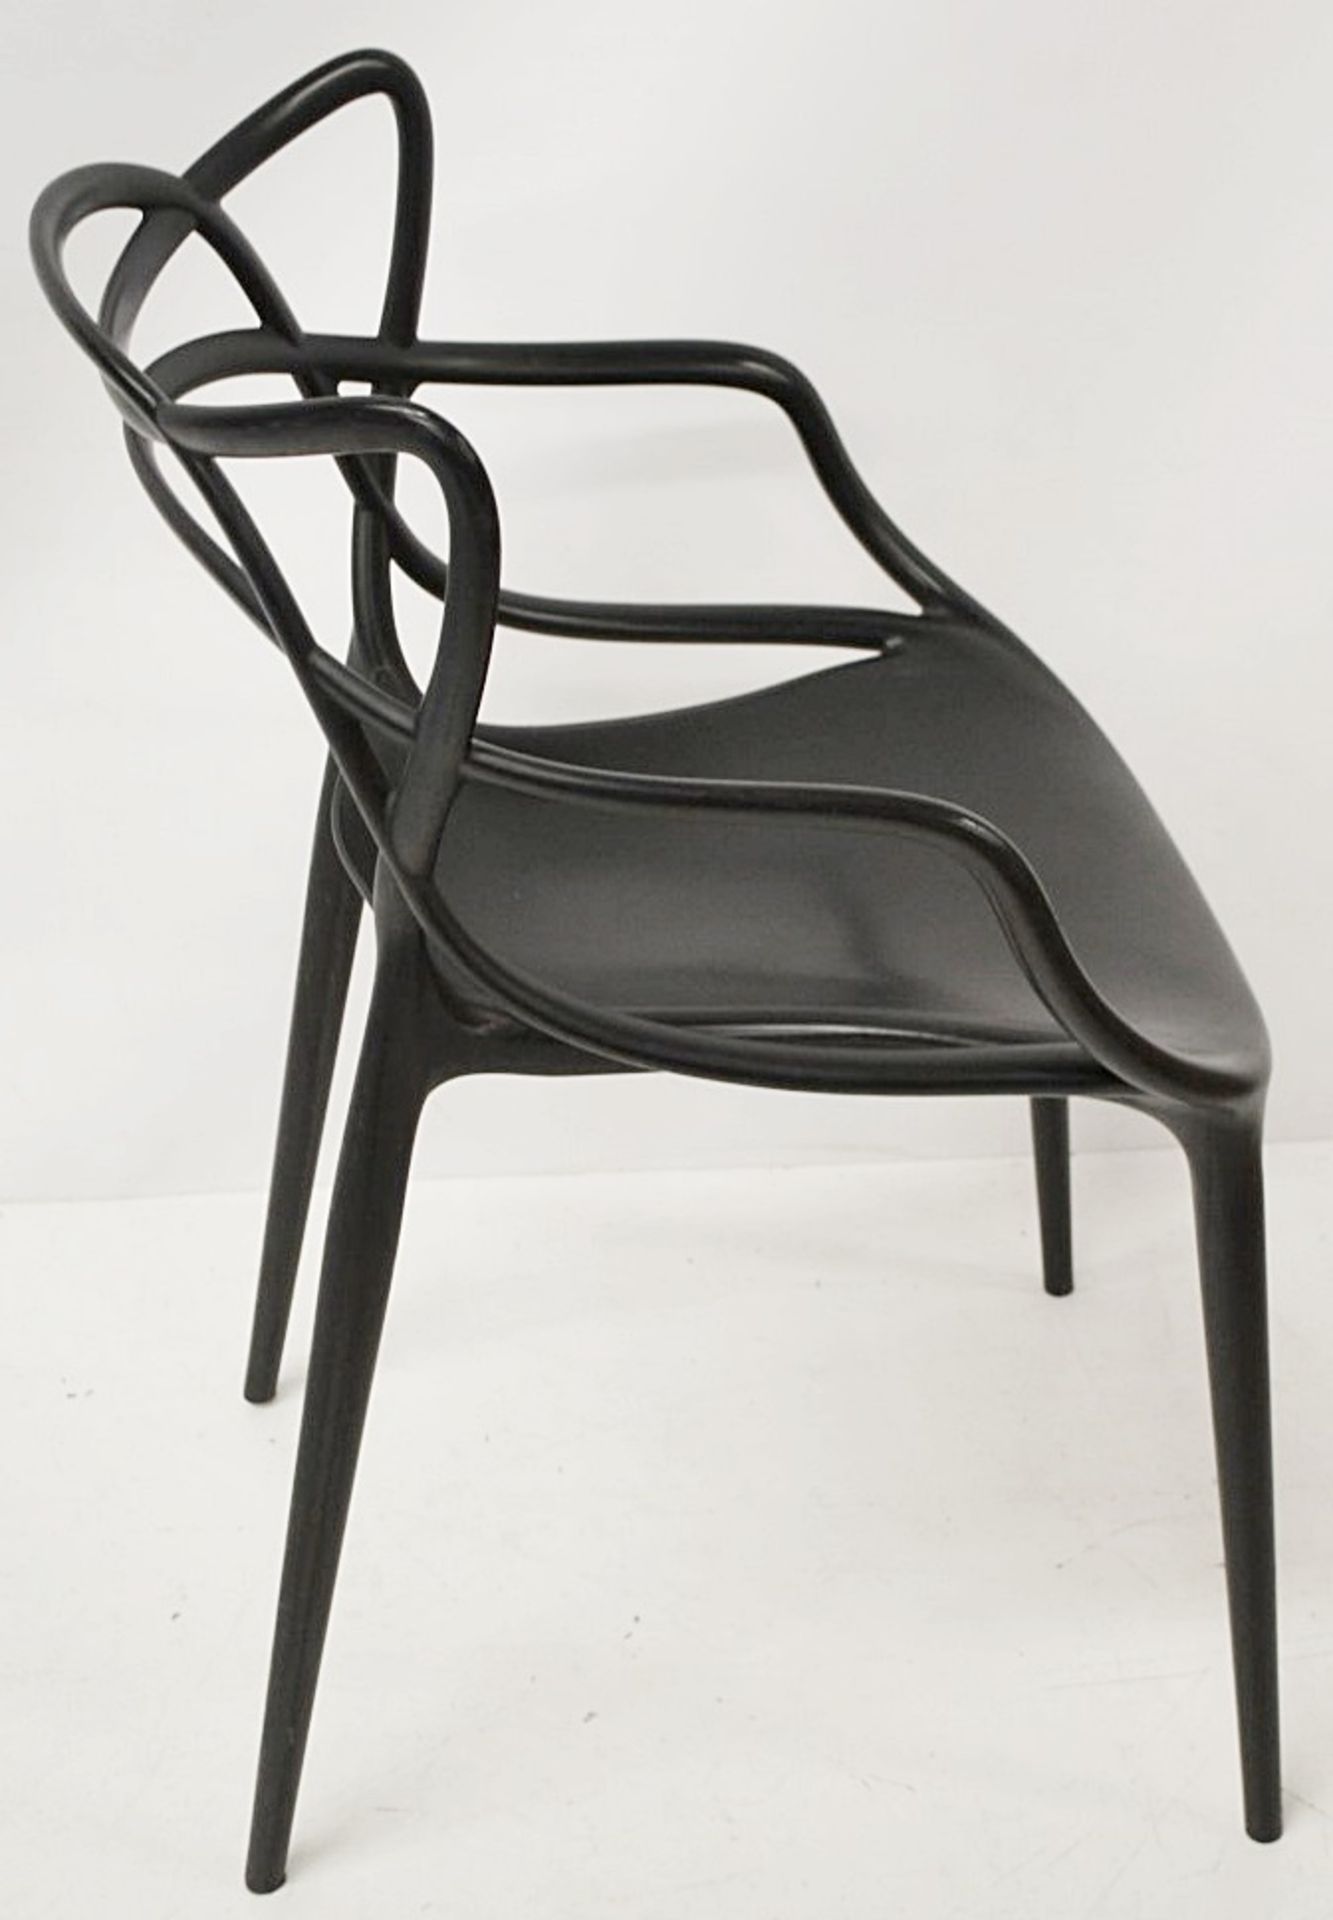 3 x Philippe Starck For Kartell 'Masters' Designer Bistro Chairs In BLACK From A City Centre Cafe - Image 4 of 7